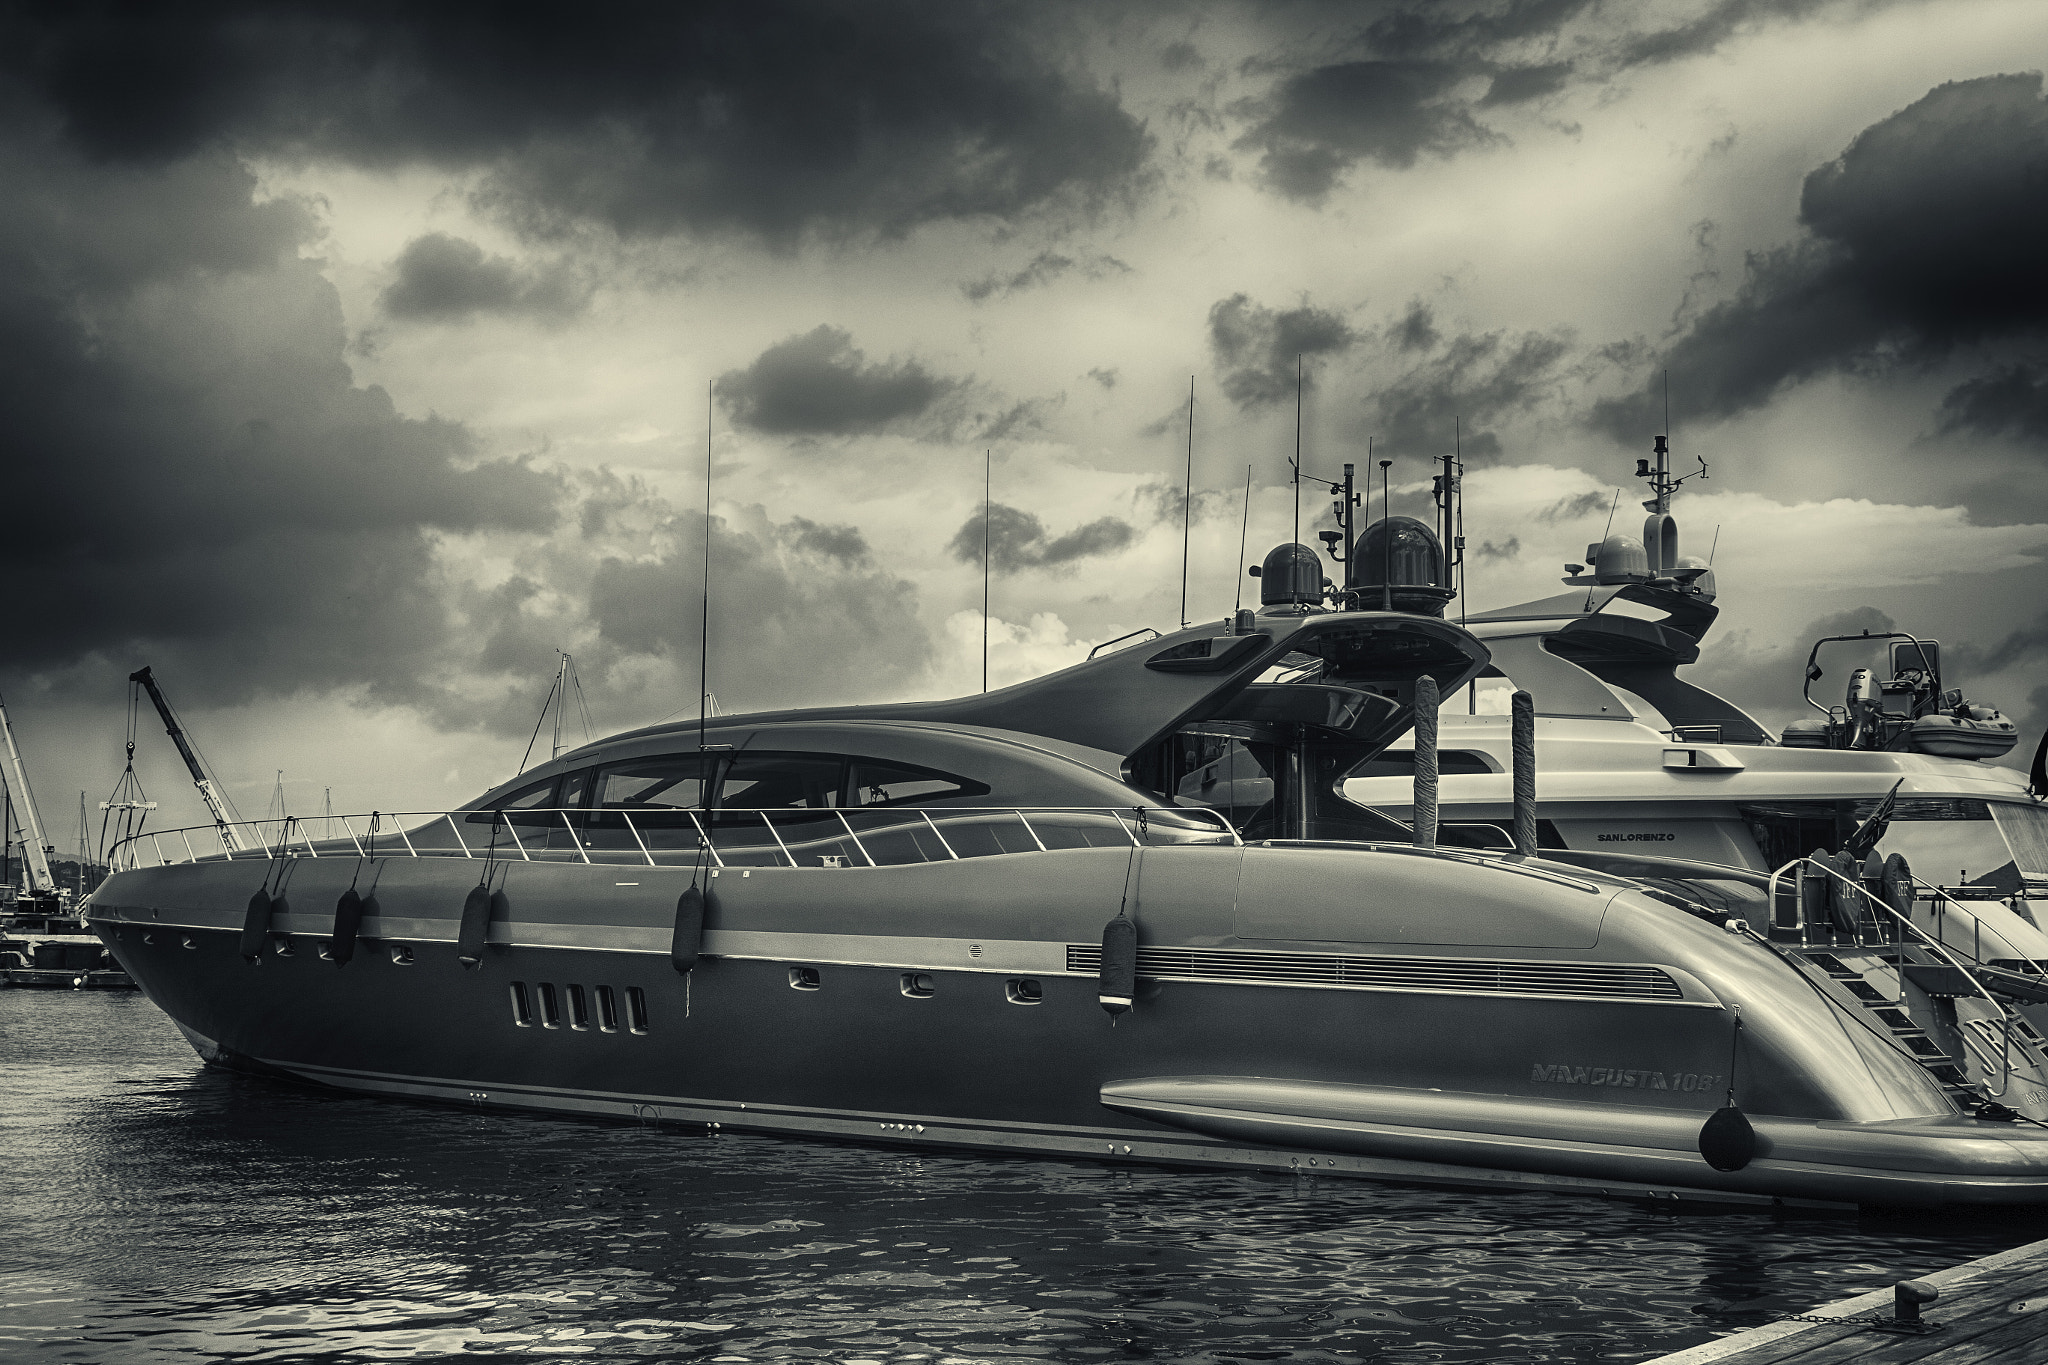 Canon EOS 70D + Sigma 24-105mm f/4 DG OS HSM | A sample photo. Luxury yacht owned by the rich and famous photography